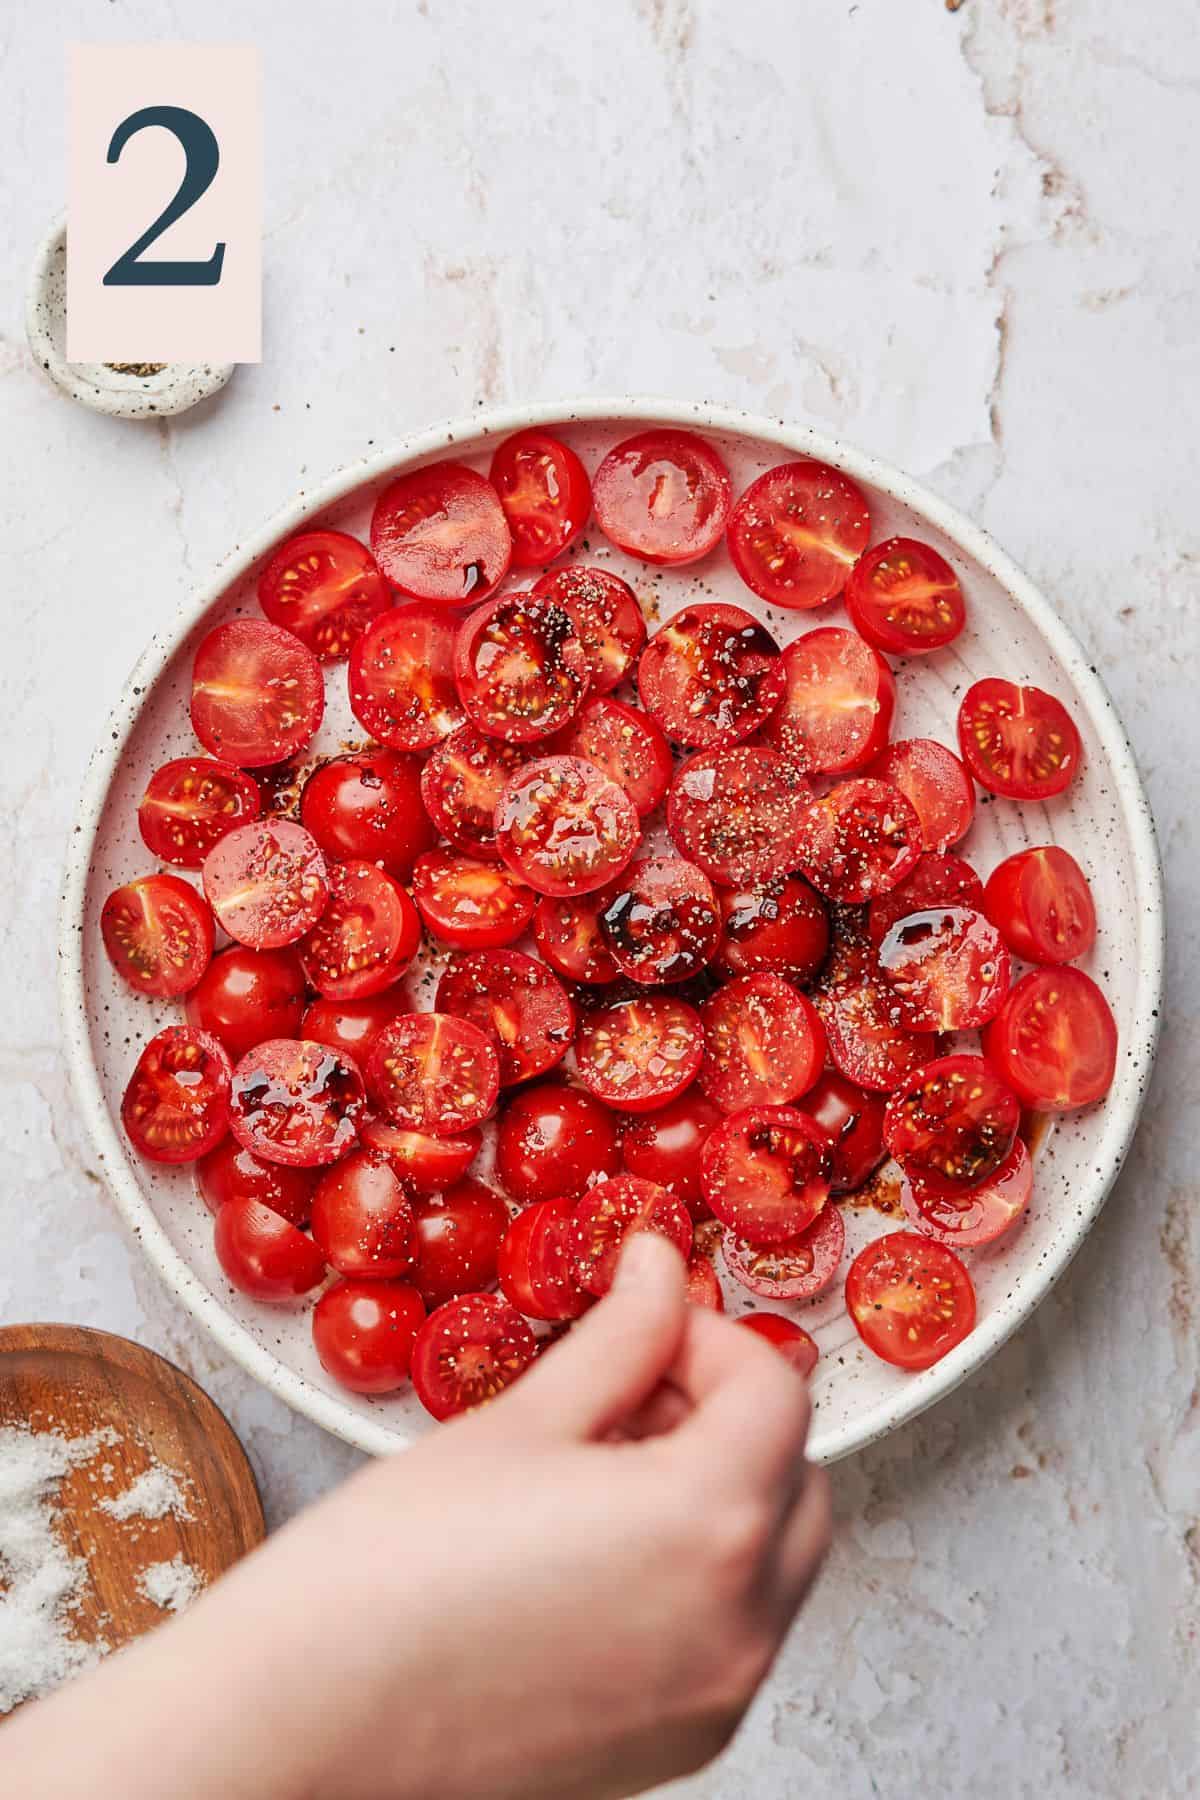 Halved cherry tomatoes with salt, pepper, and balsamic glaze on top.